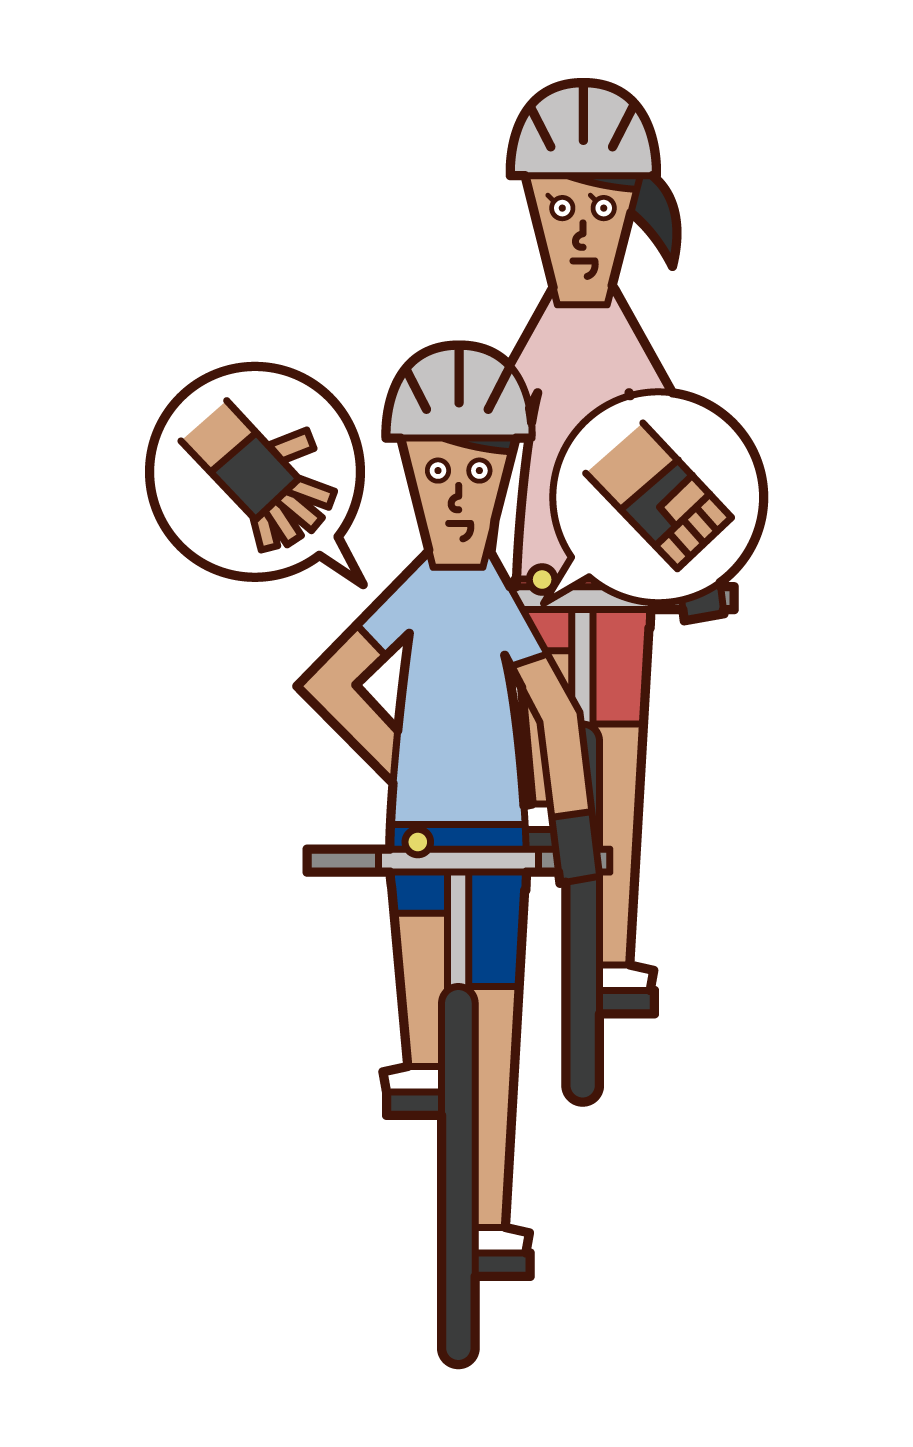 Illustration of a man slowing down a bicycle's hand signal